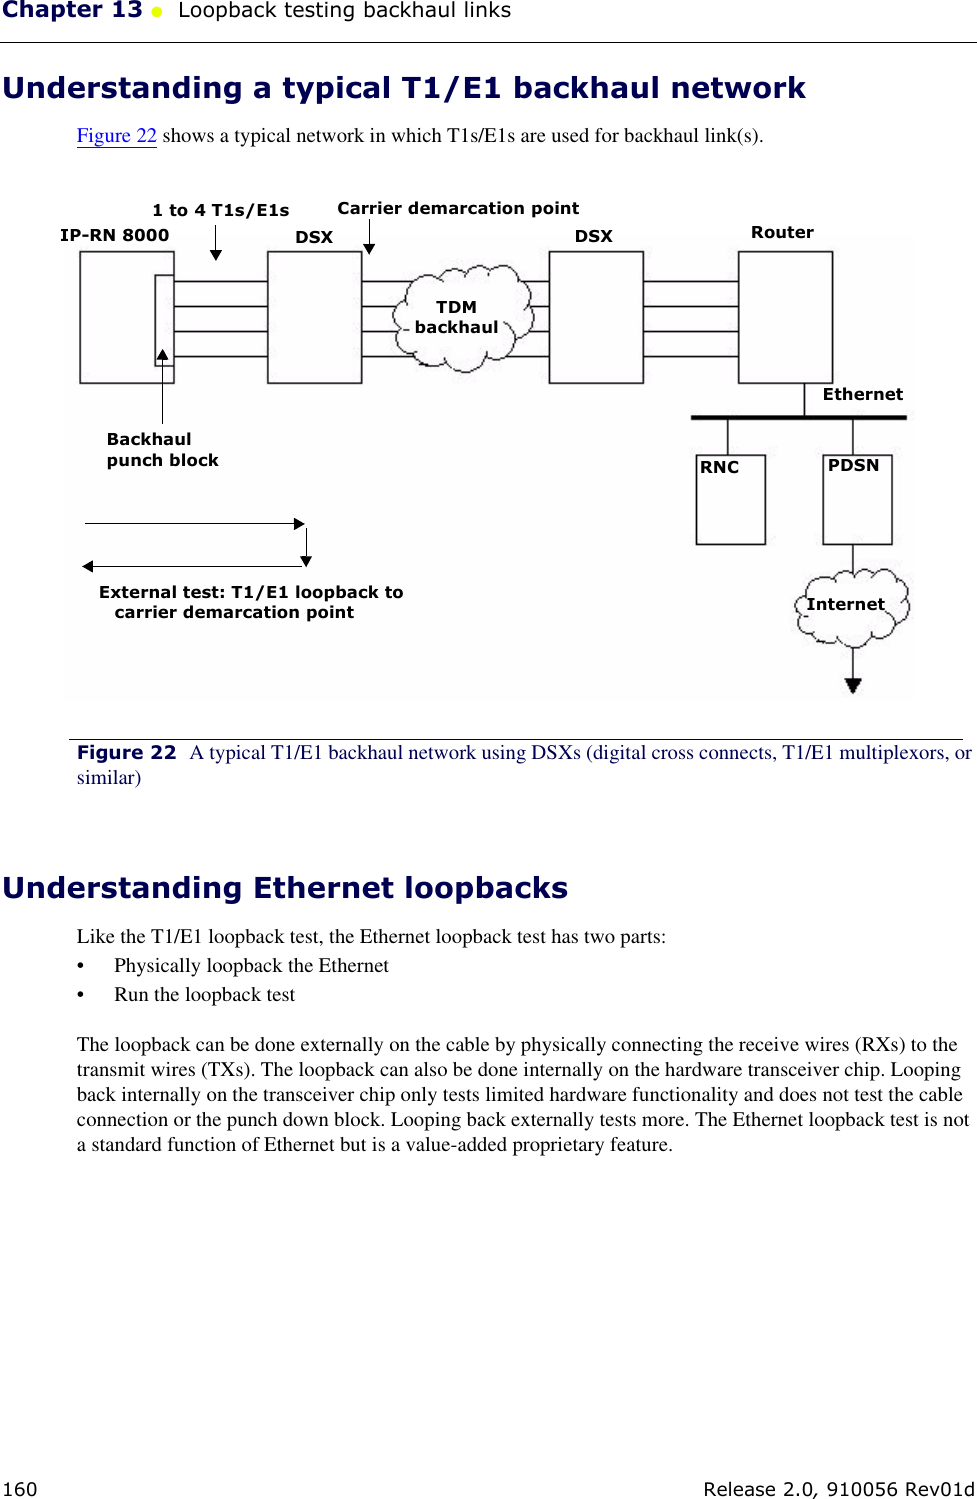 Chapter 13 ●  Loopback testing backhaul links160 Release 2.0, 910056 Rev01dUnderstanding a typical T1/E1 backhaul networkFigure 22 shows a typical network in which T1s/E1s are used for backhaul link(s). Figure 22 A typical T1/E1 backhaul network using DSXs (digital cross connects, T1/E1 multiplexors, or similar)Understanding Ethernet loopbacksLike the T1/E1 loopback test, the Ethernet loopback test has two parts:• Physically loopback the Ethernet • Run the loopback testThe loopback can be done externally on the cable by physically connecting the receive wires (RXs) to the transmit wires (TXs). The loopback can also be done internally on the hardware transceiver chip. Looping back internally on the transceiver chip only tests limited hardware functionality and does not test the cable connection or the punch down block. Looping back externally tests more. The Ethernet loopback test is not a standard function of Ethernet but is a value-added proprietary feature.Backhaul 1 to 4 T1s/E1sIP-RN 8000 DSX DSX RouterRNC PDSNInternetTDMbackhaulpunch blockEthernetExternal test: T1/E1 loopback tocarrier demarcation pointCarrier demarcation point